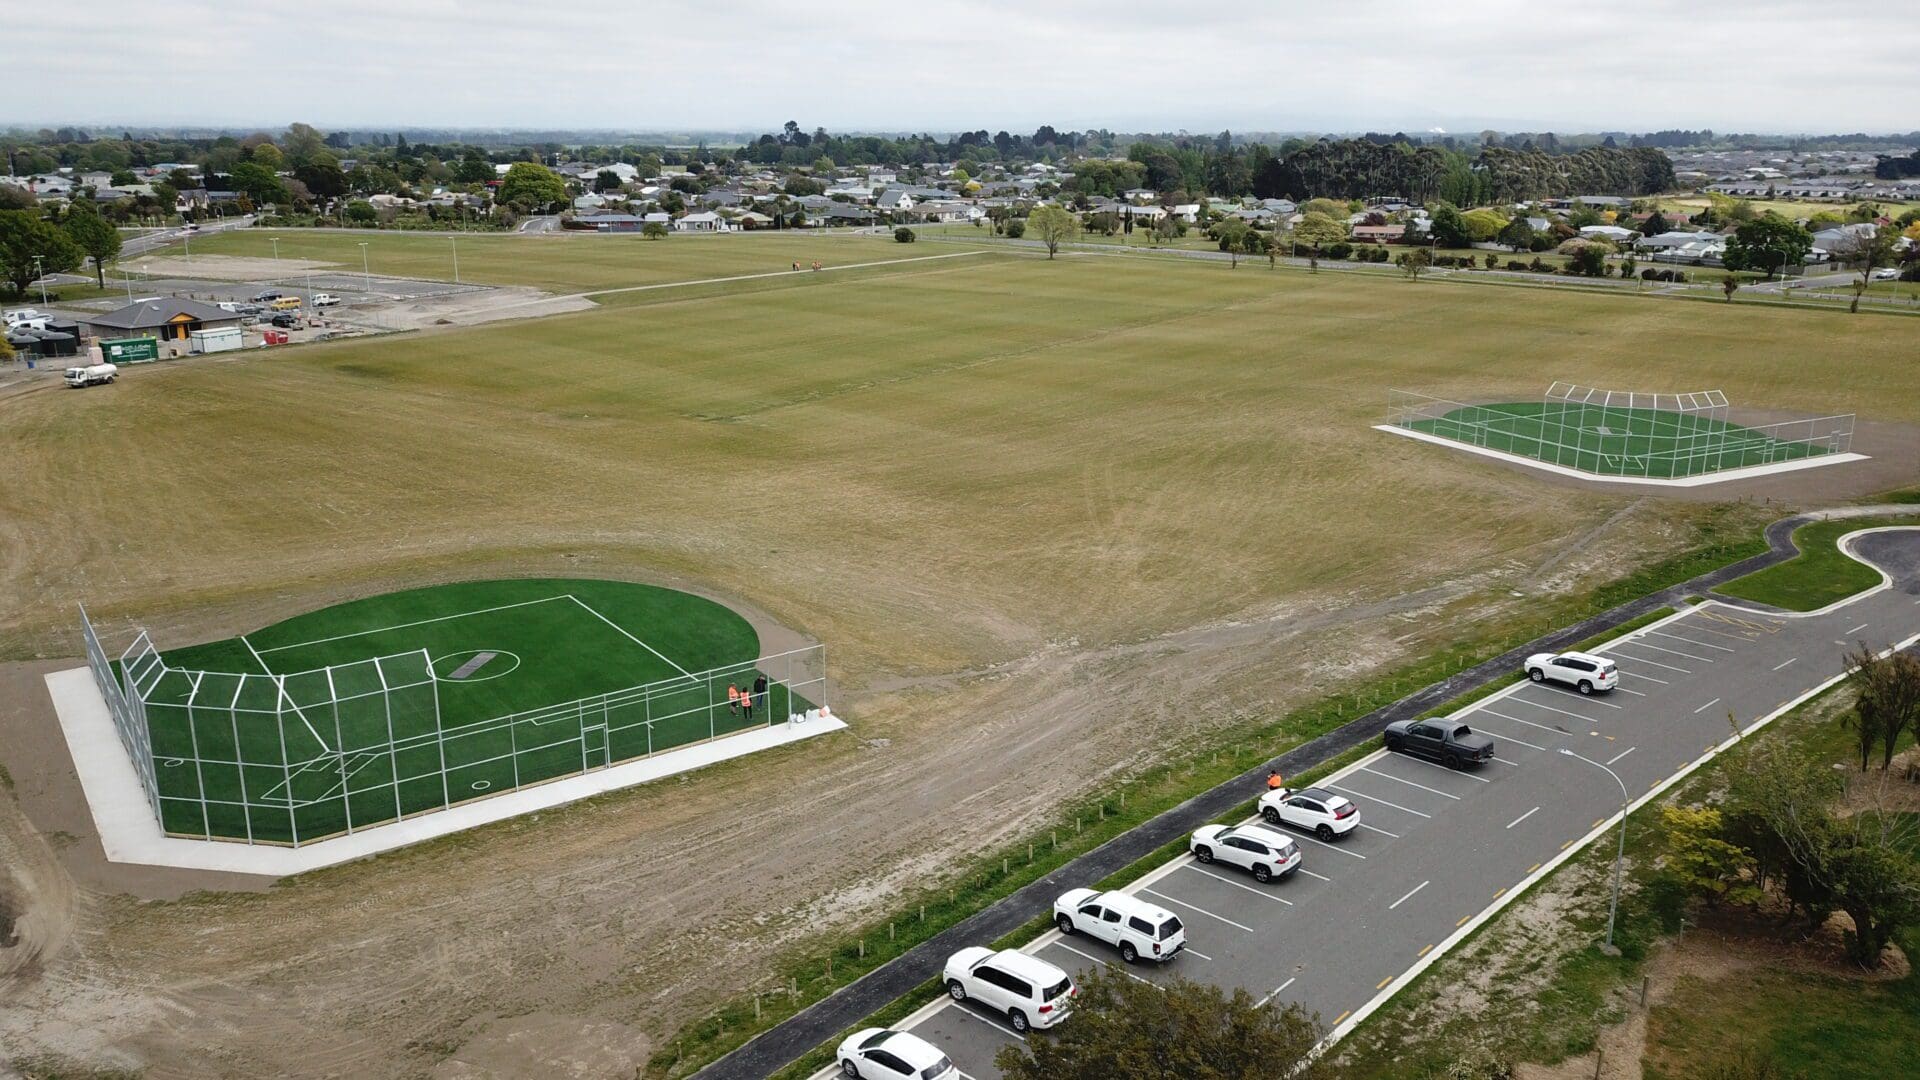 Twin TigerTurf Endurance 50 softball diamonds constructed from base to laser-perfect surface